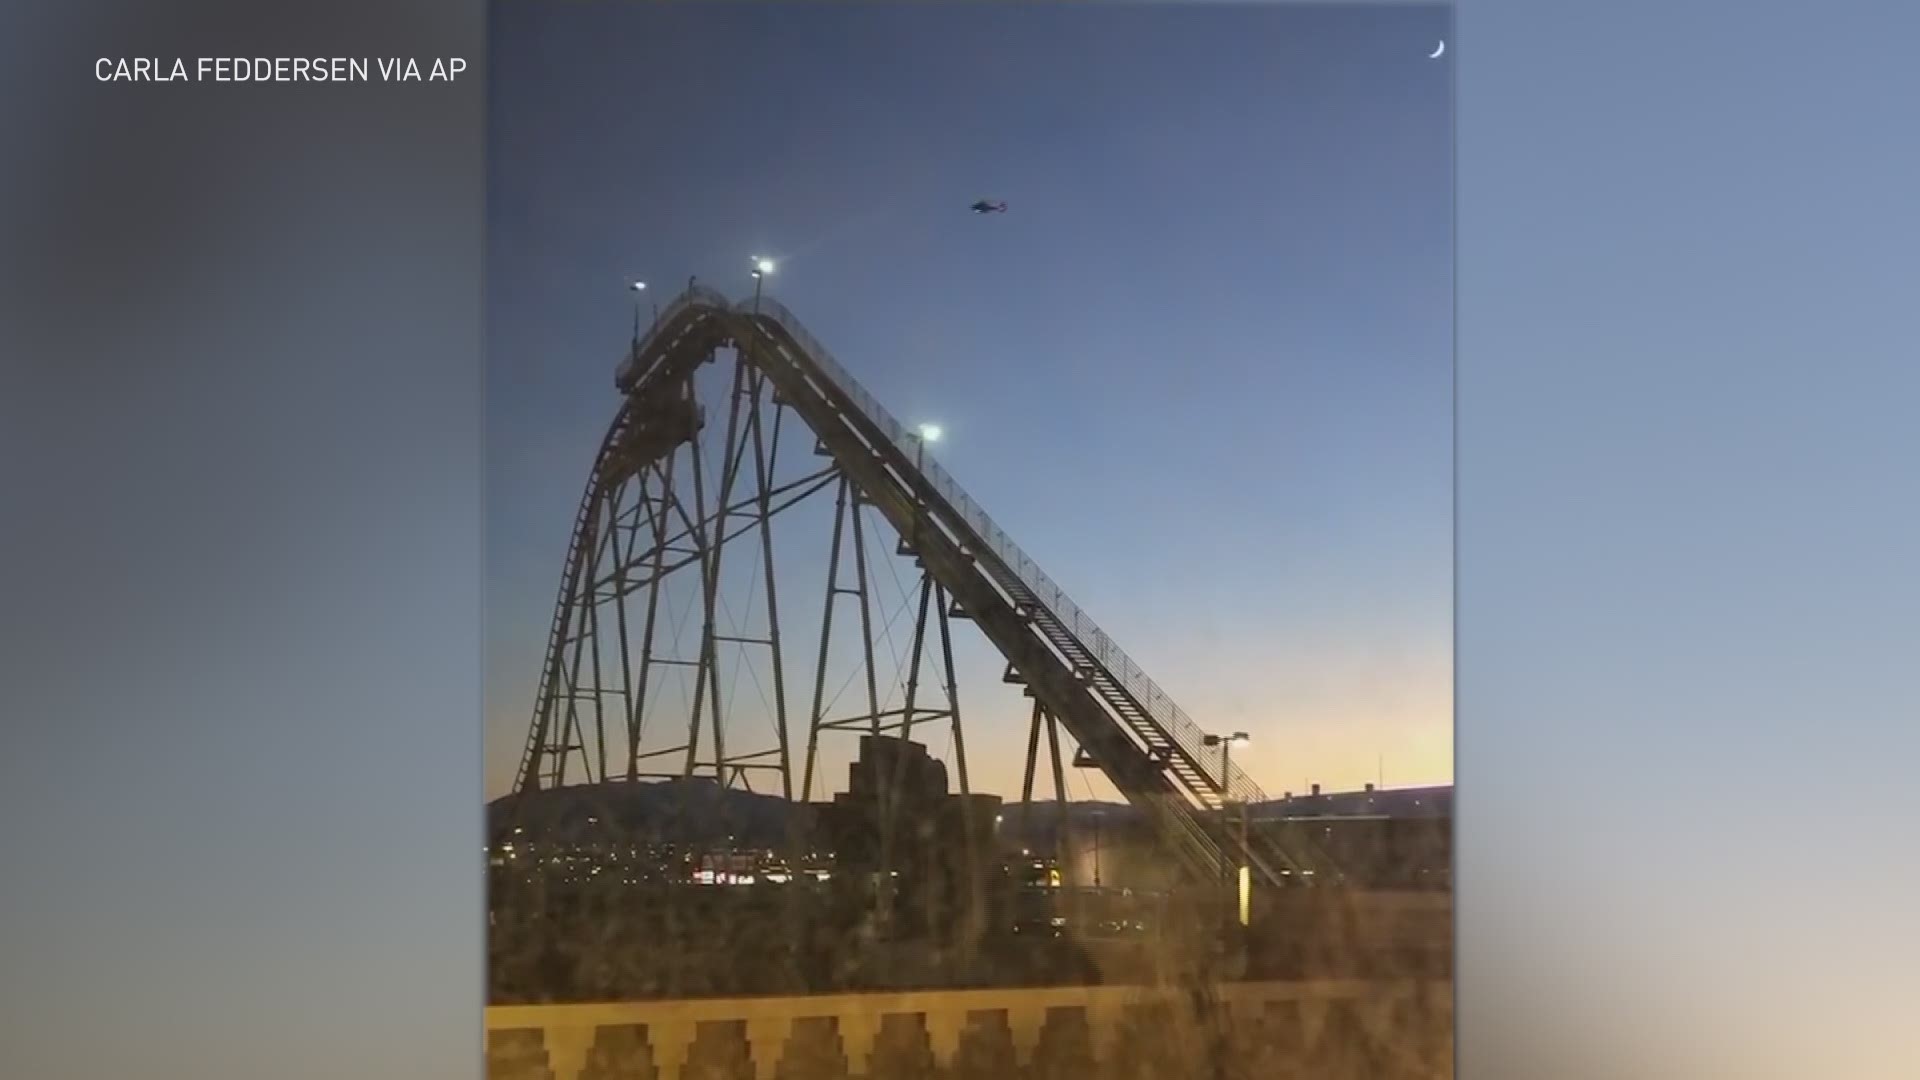 A 7.1 magnitude earthquake that hit Southern California Friday night could be felt all the way in Las Vegas. Carla Feddersen filmed a rollercoaster in Las Vegas swaying in the quake.  (Via AP)